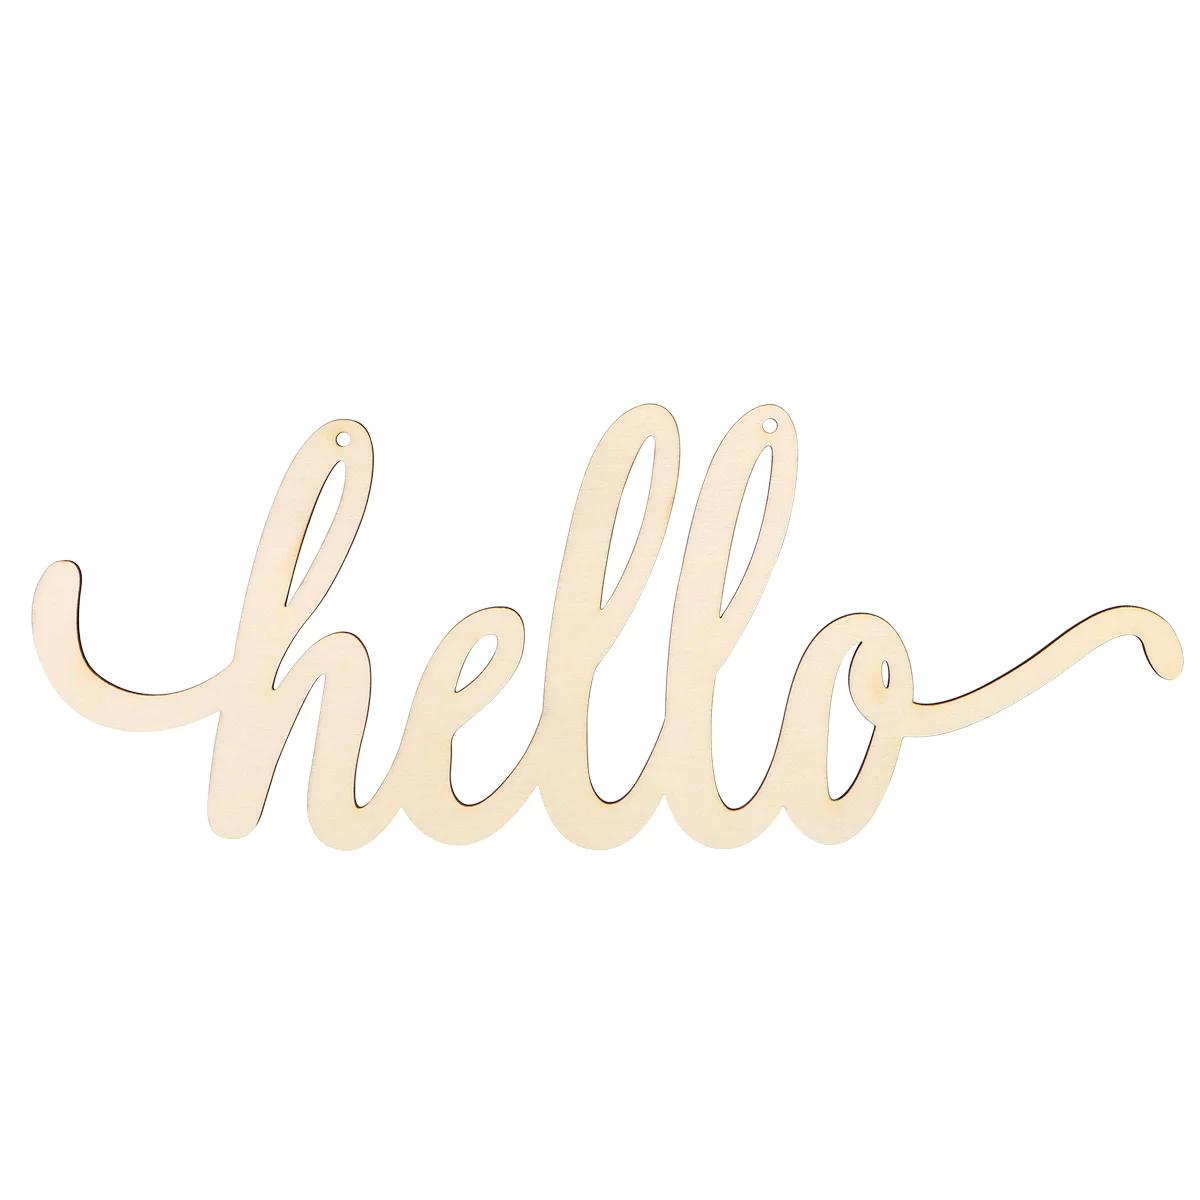 

Sign Woodhello Decor Wooden Welcome Letters Wall Home Wreath Plaque Crafts Words Signs Door Cursive Front Cutout Hanging Diy